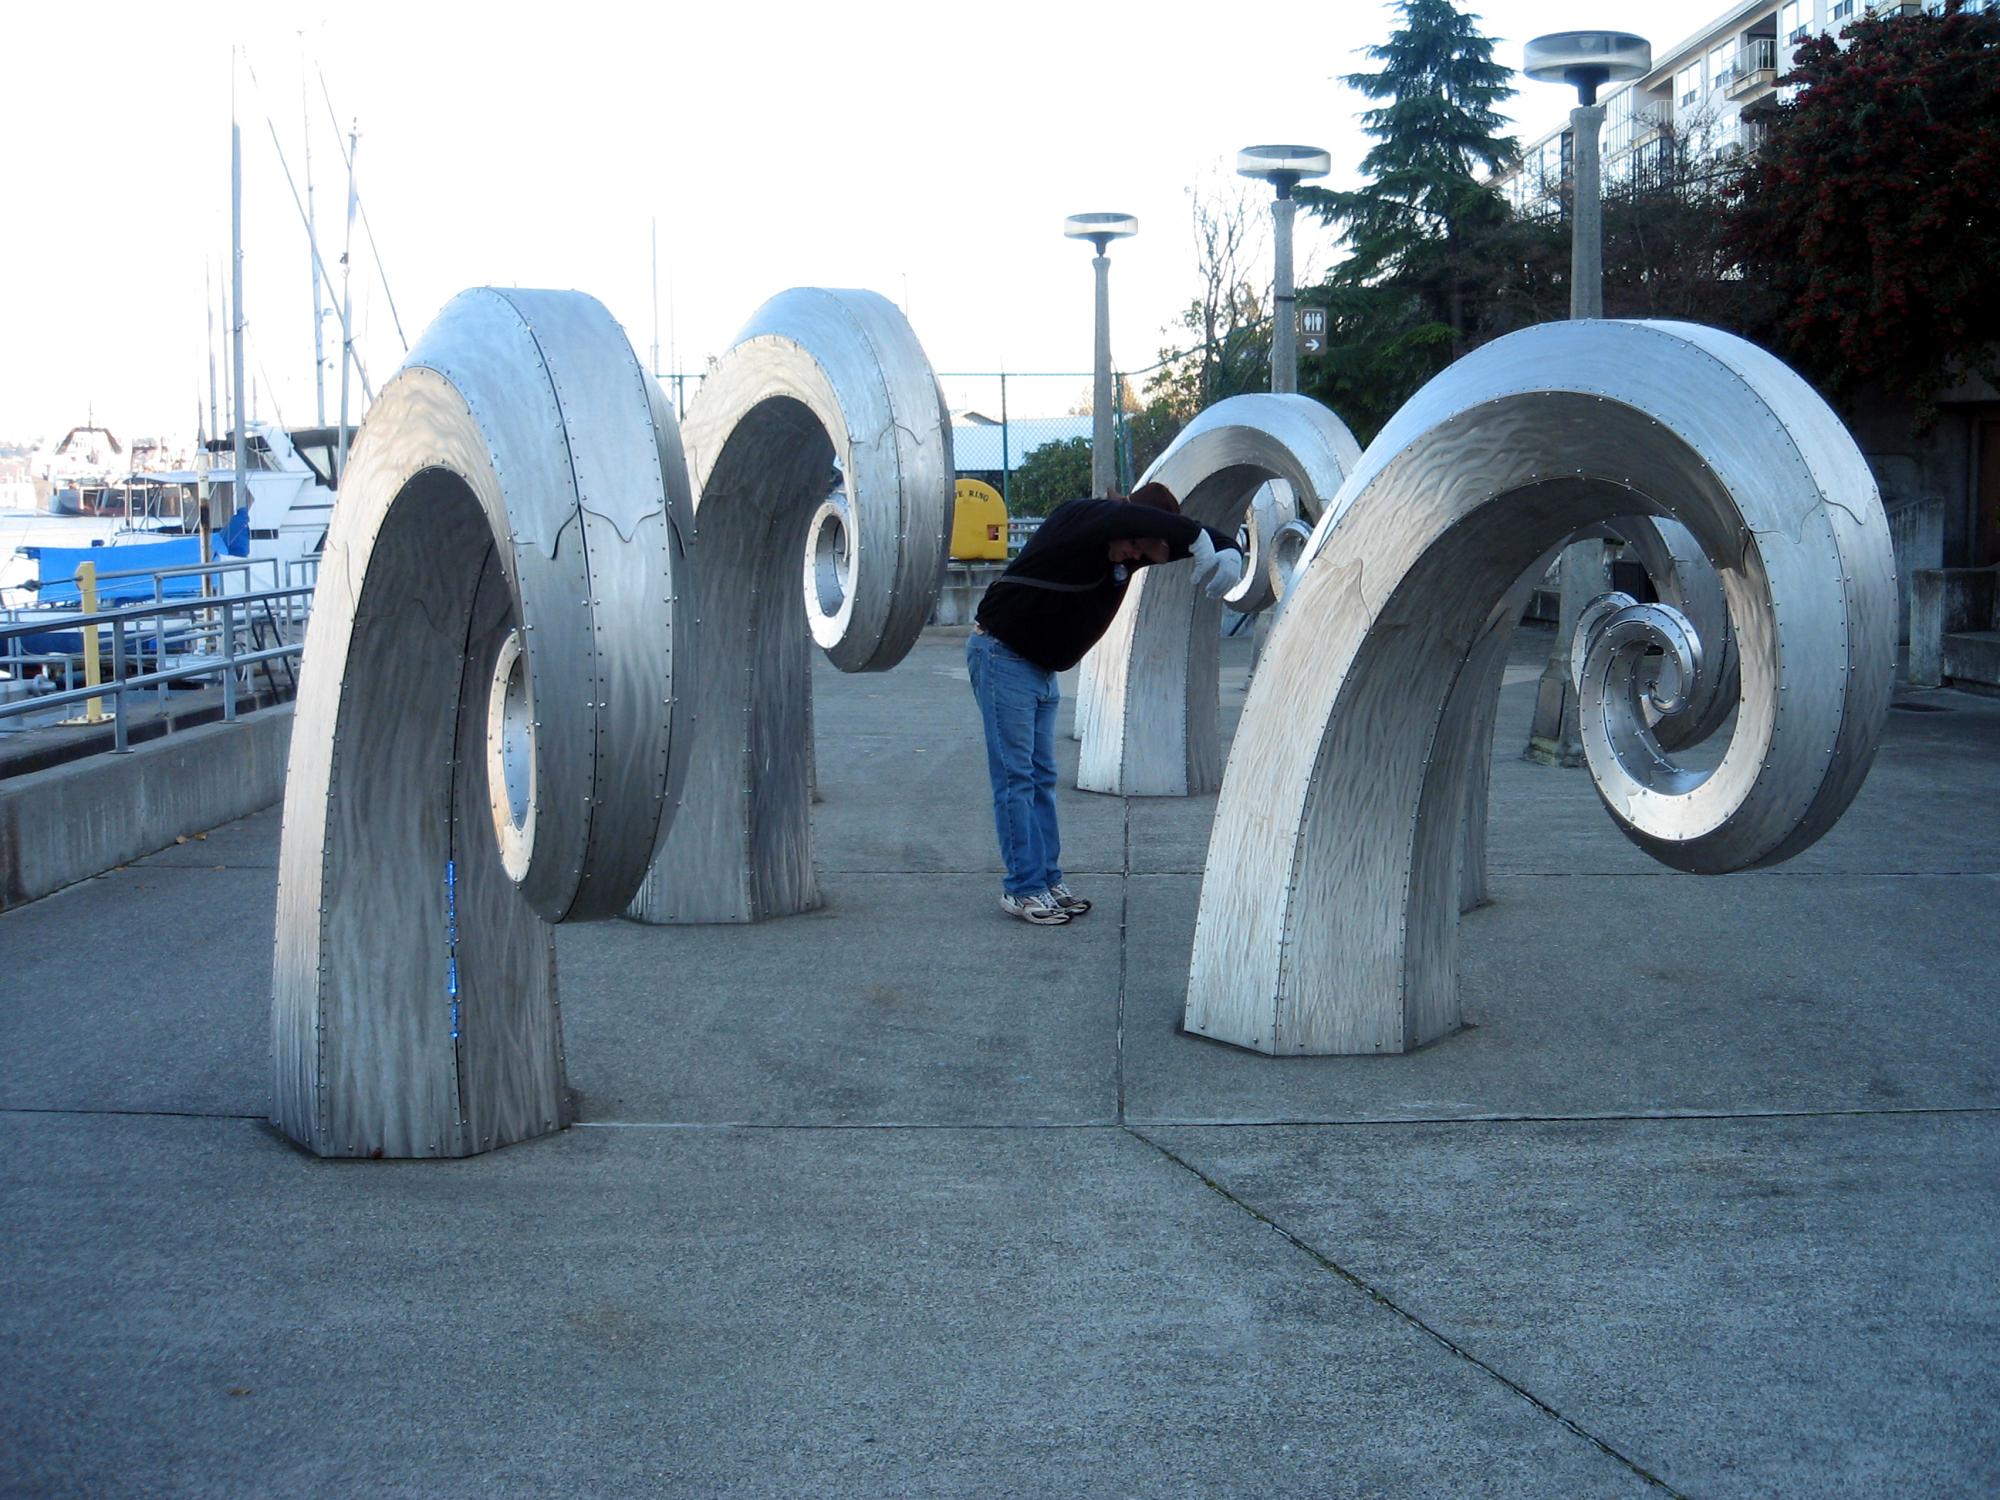 Seattle (2002-2009) - Will Wave #1